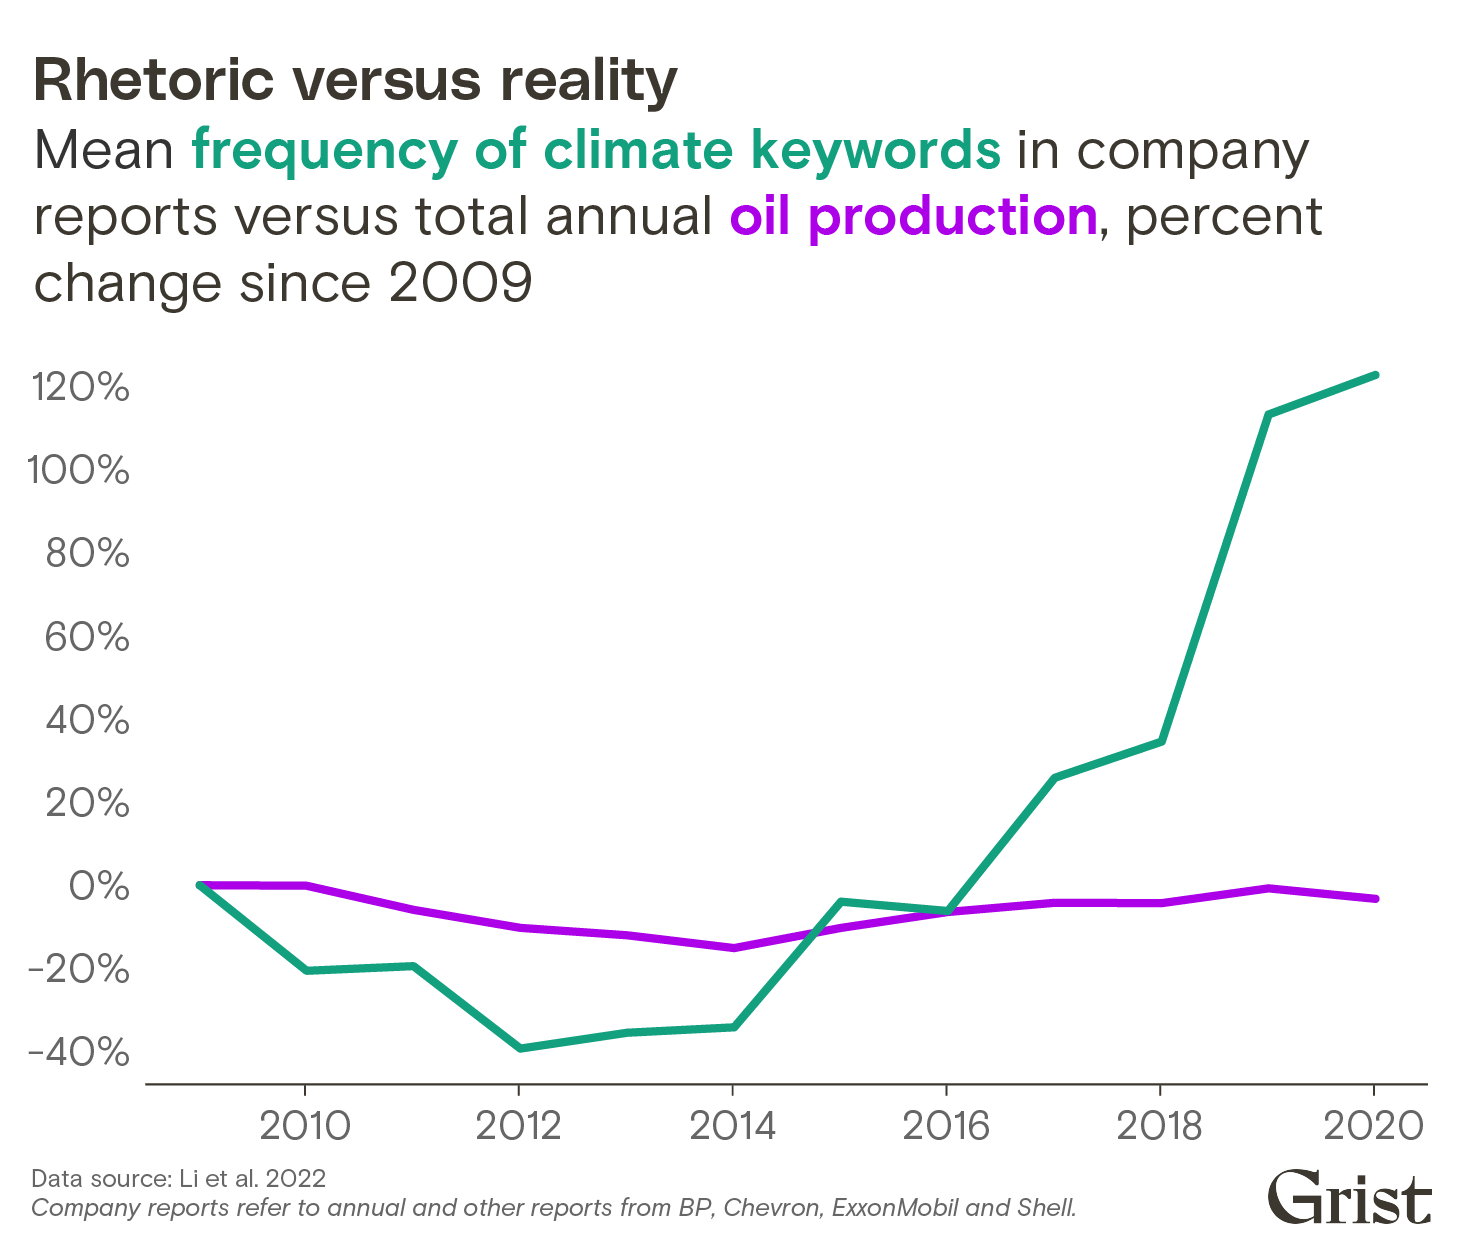 A line chart showing the percent change in climate keywords in energy-company reports versus the percent change in oil production through 2020 (relative to 2009). Climate rhetoric has risen, but oil production has remained constant.